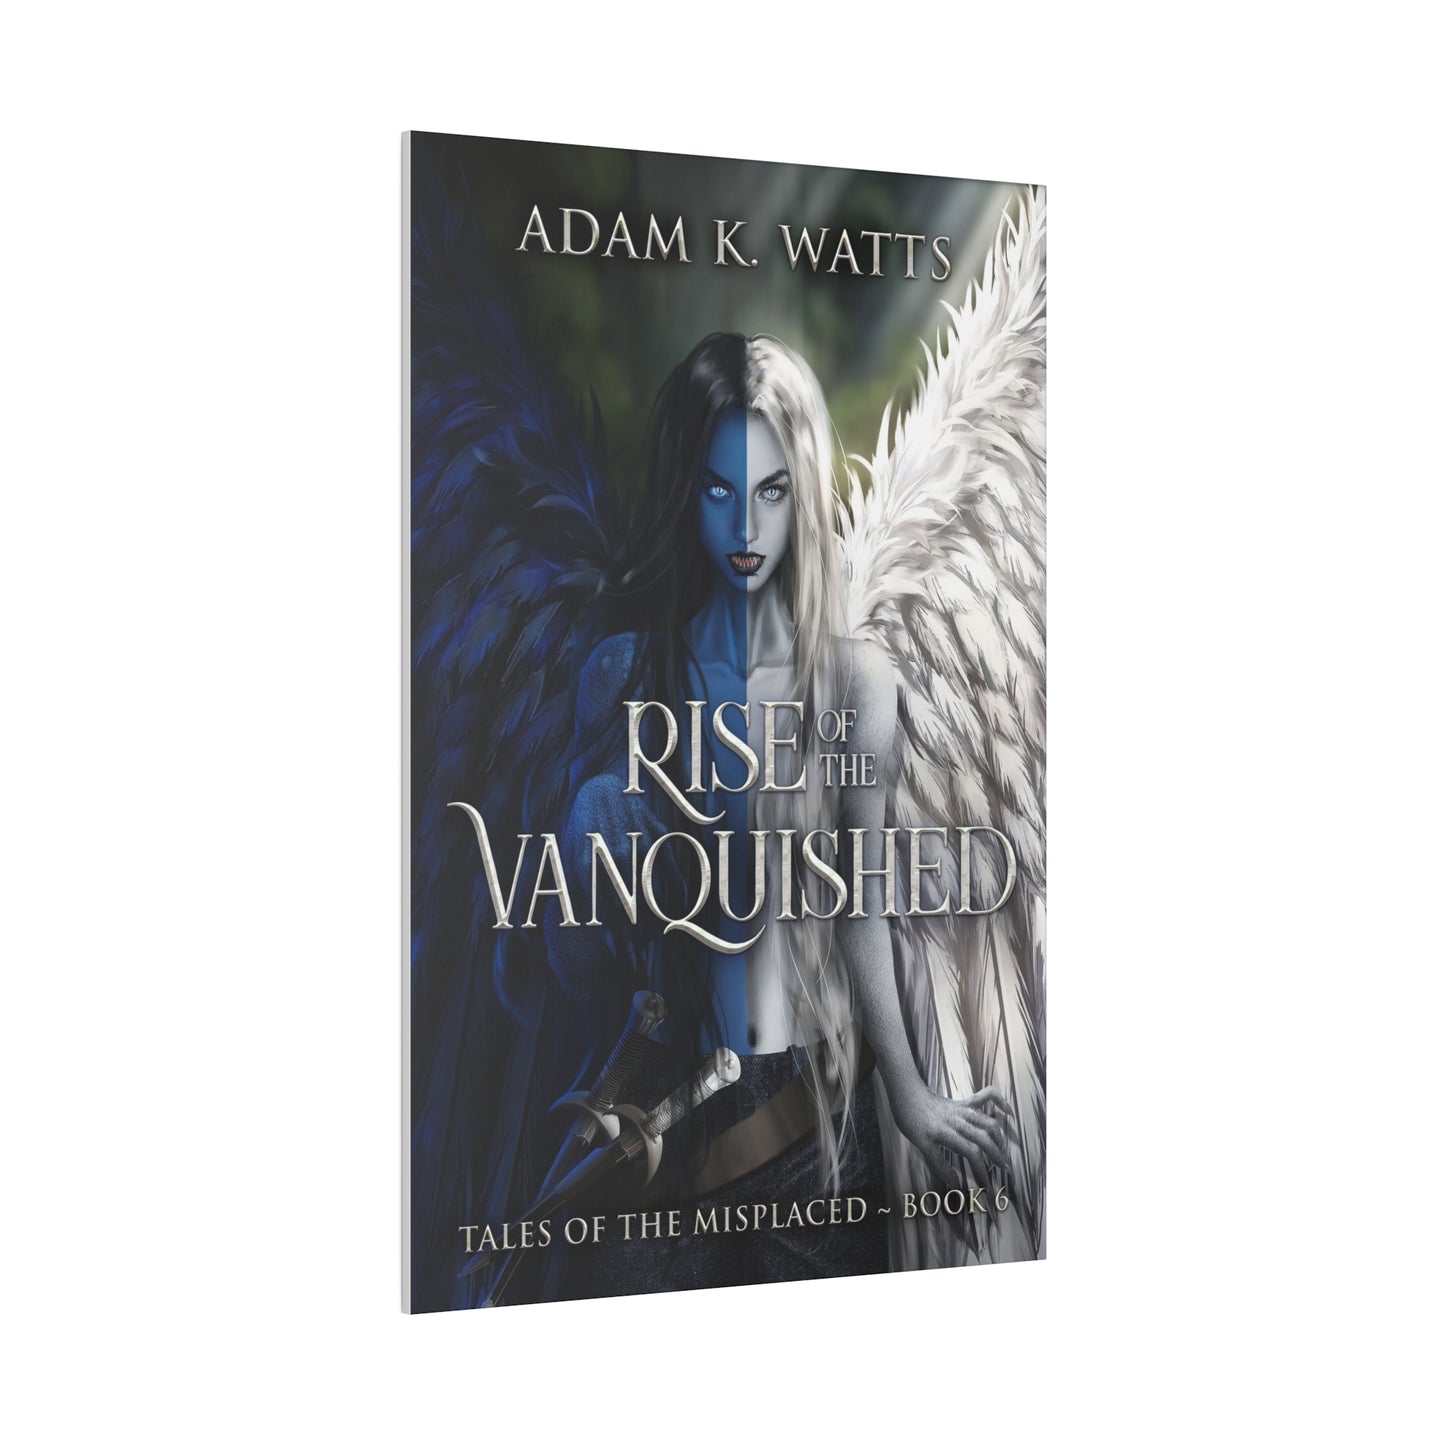 Rise of the Vanquished - Canvas